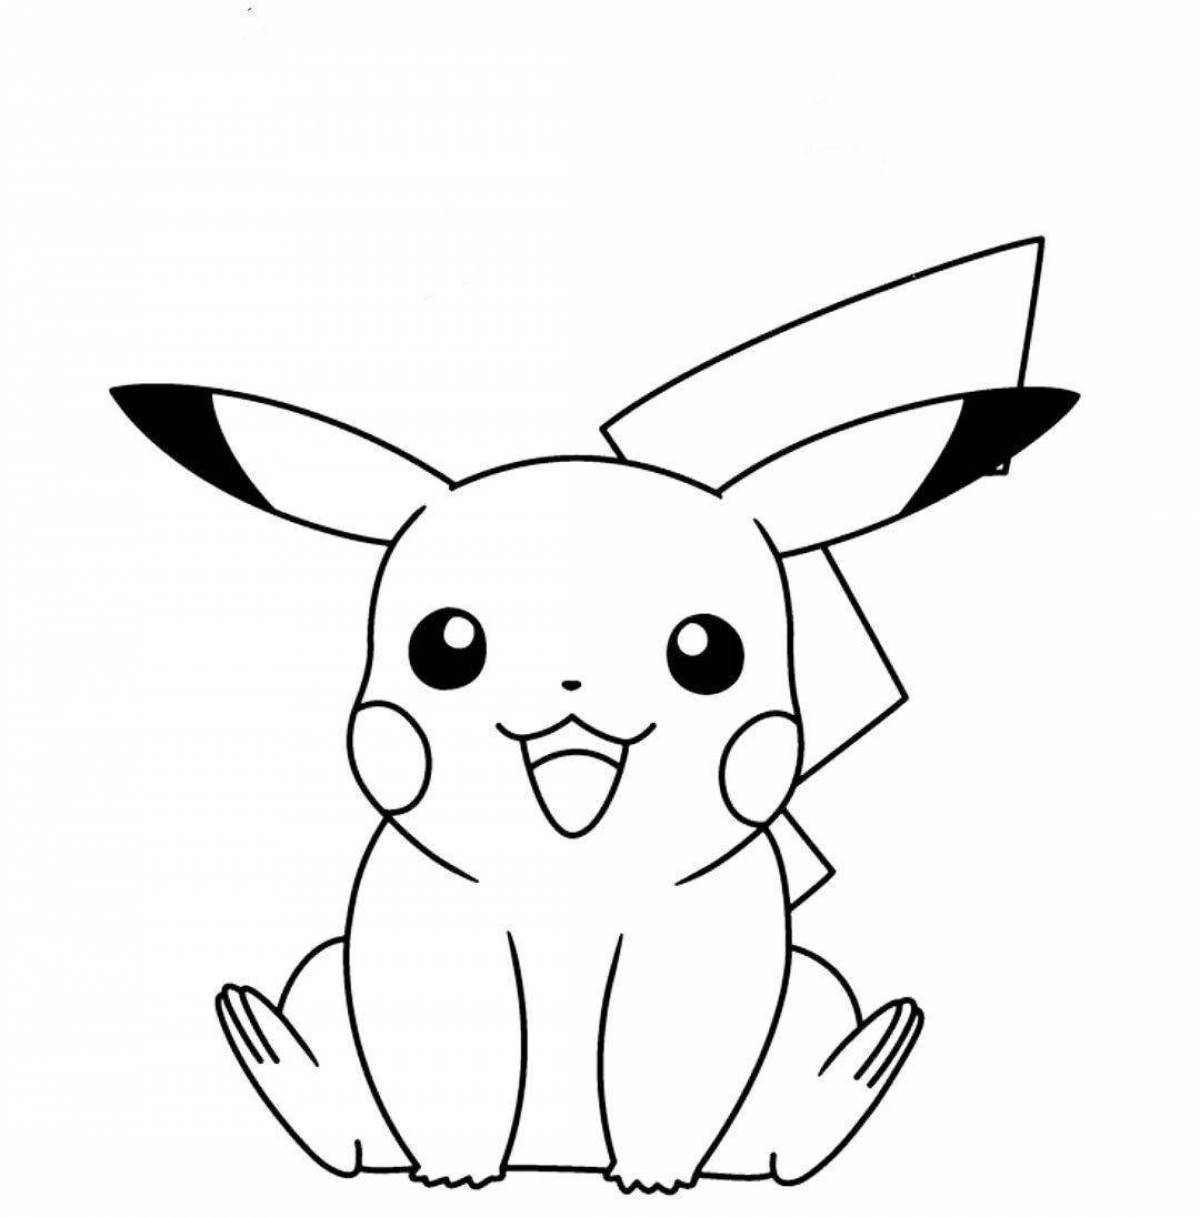 Coloring page adorable pikachu with a heart